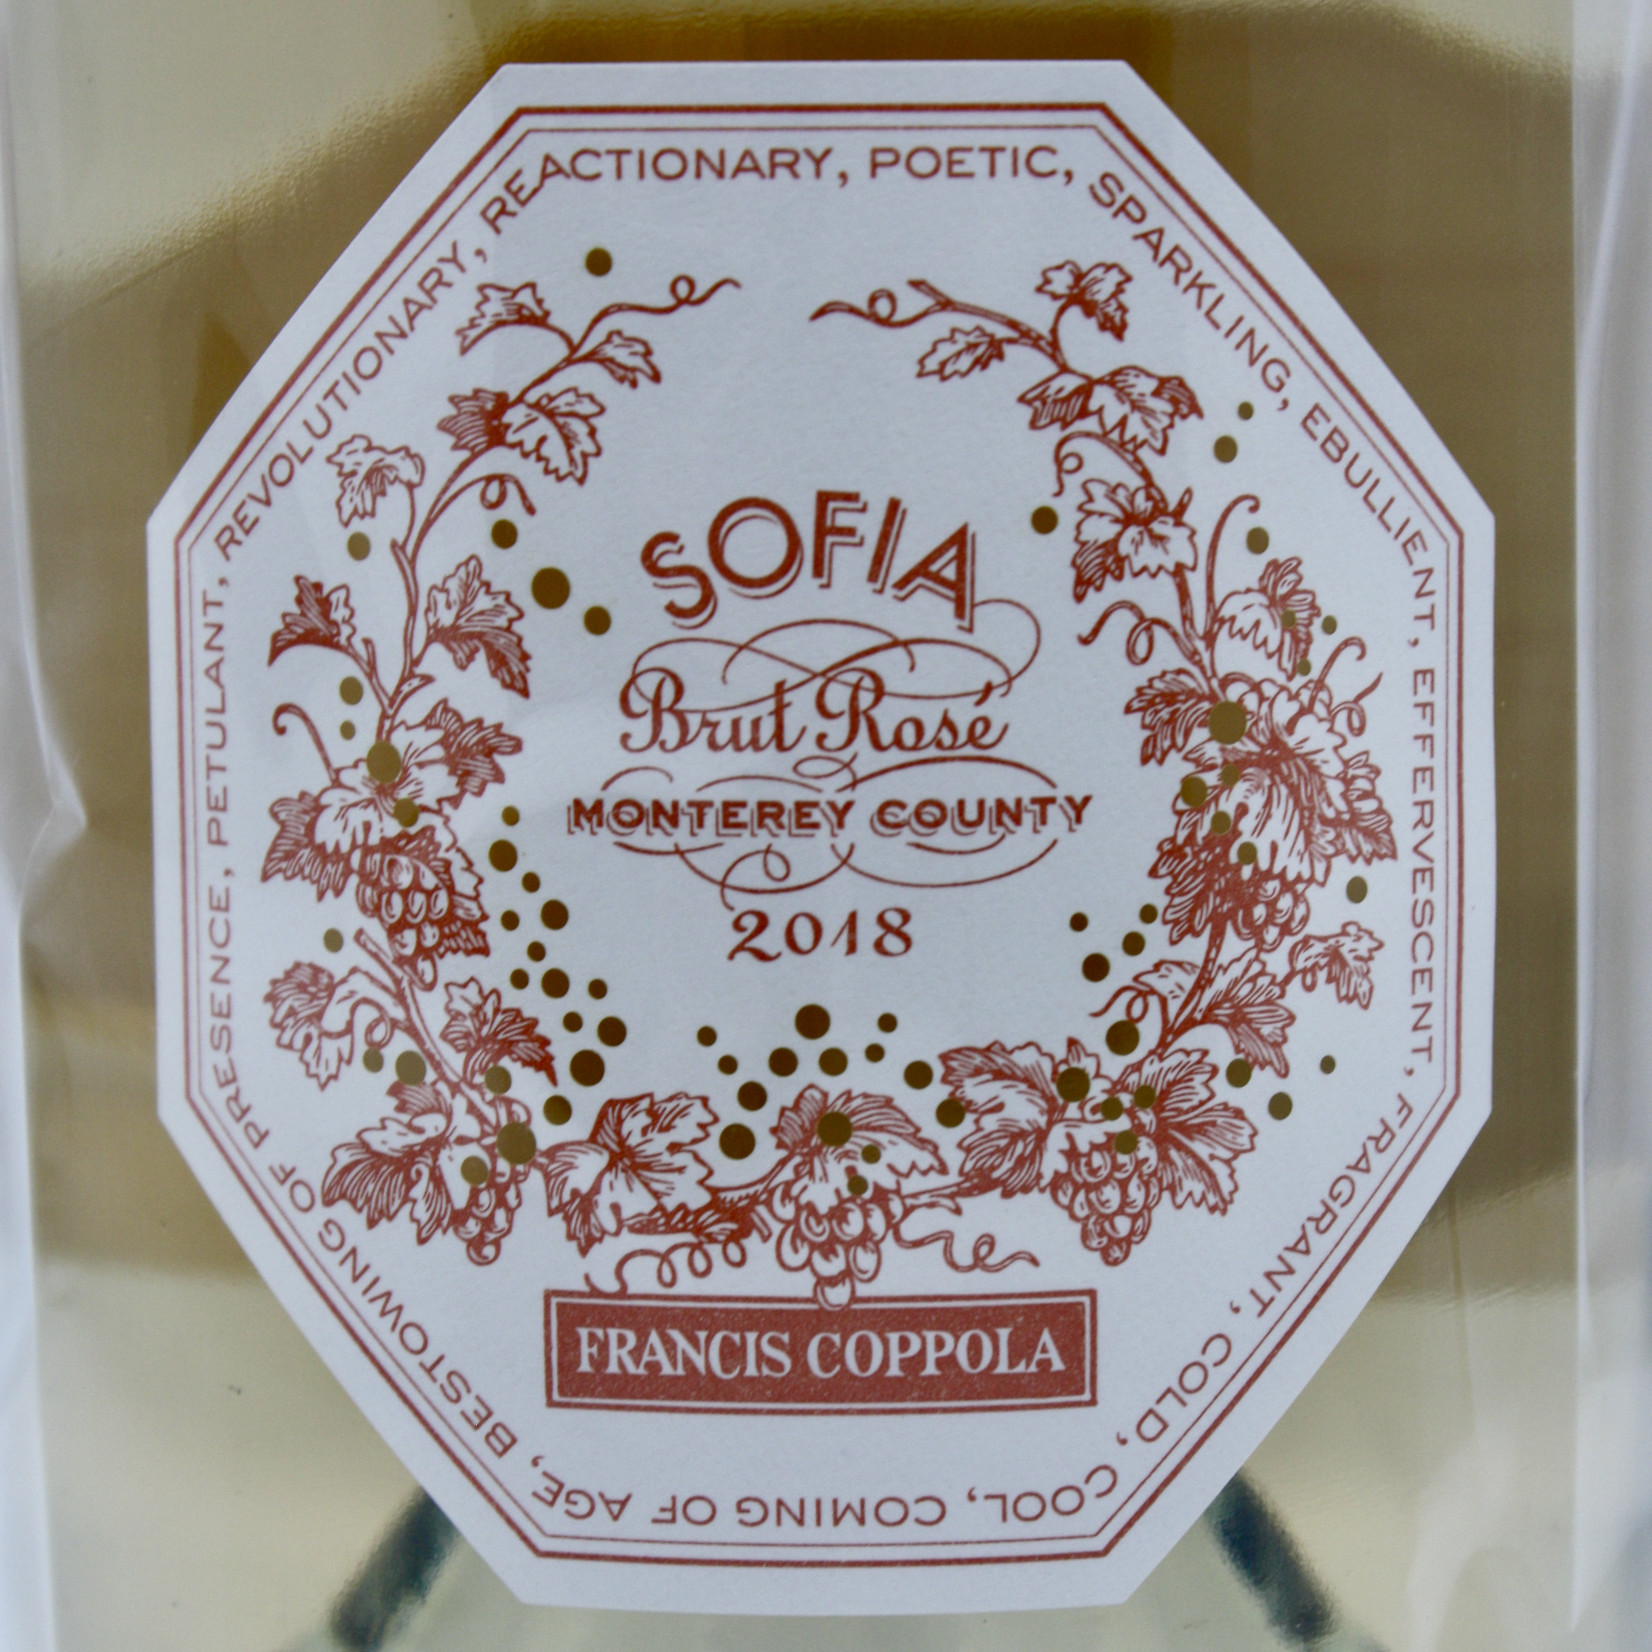 Francis Ford Coppola Winery, "Sofia" Brut Rosé 2018, Monterey County, CA